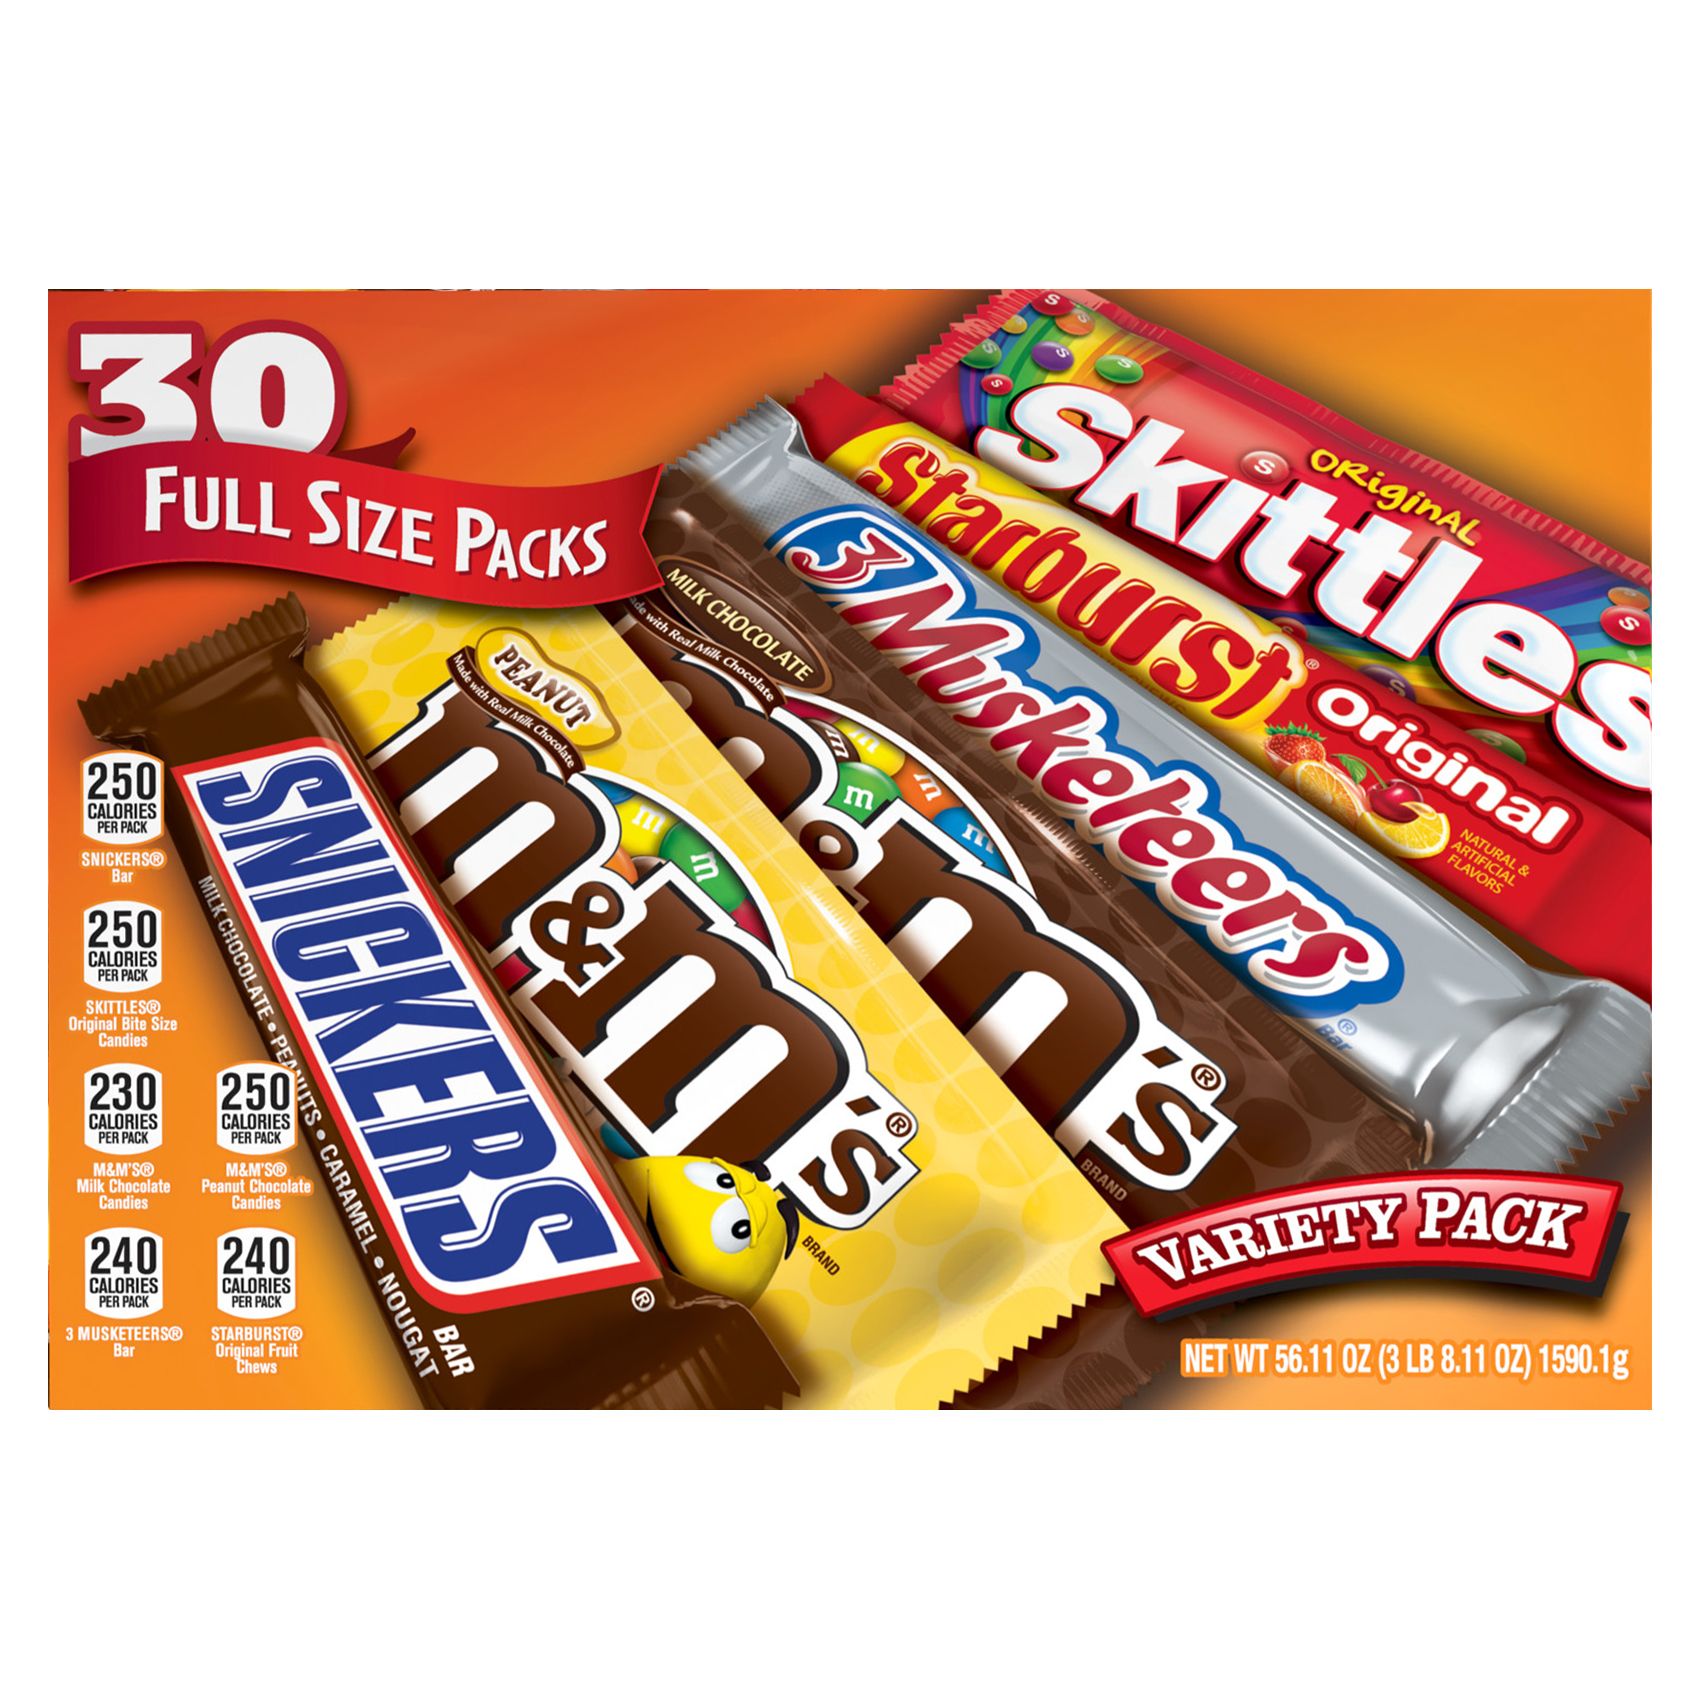 M&M'S, Snickers, Skittles and More Chocolate Candy Bars, Bulk Full Size Fundraiser Pack, 30 ct.